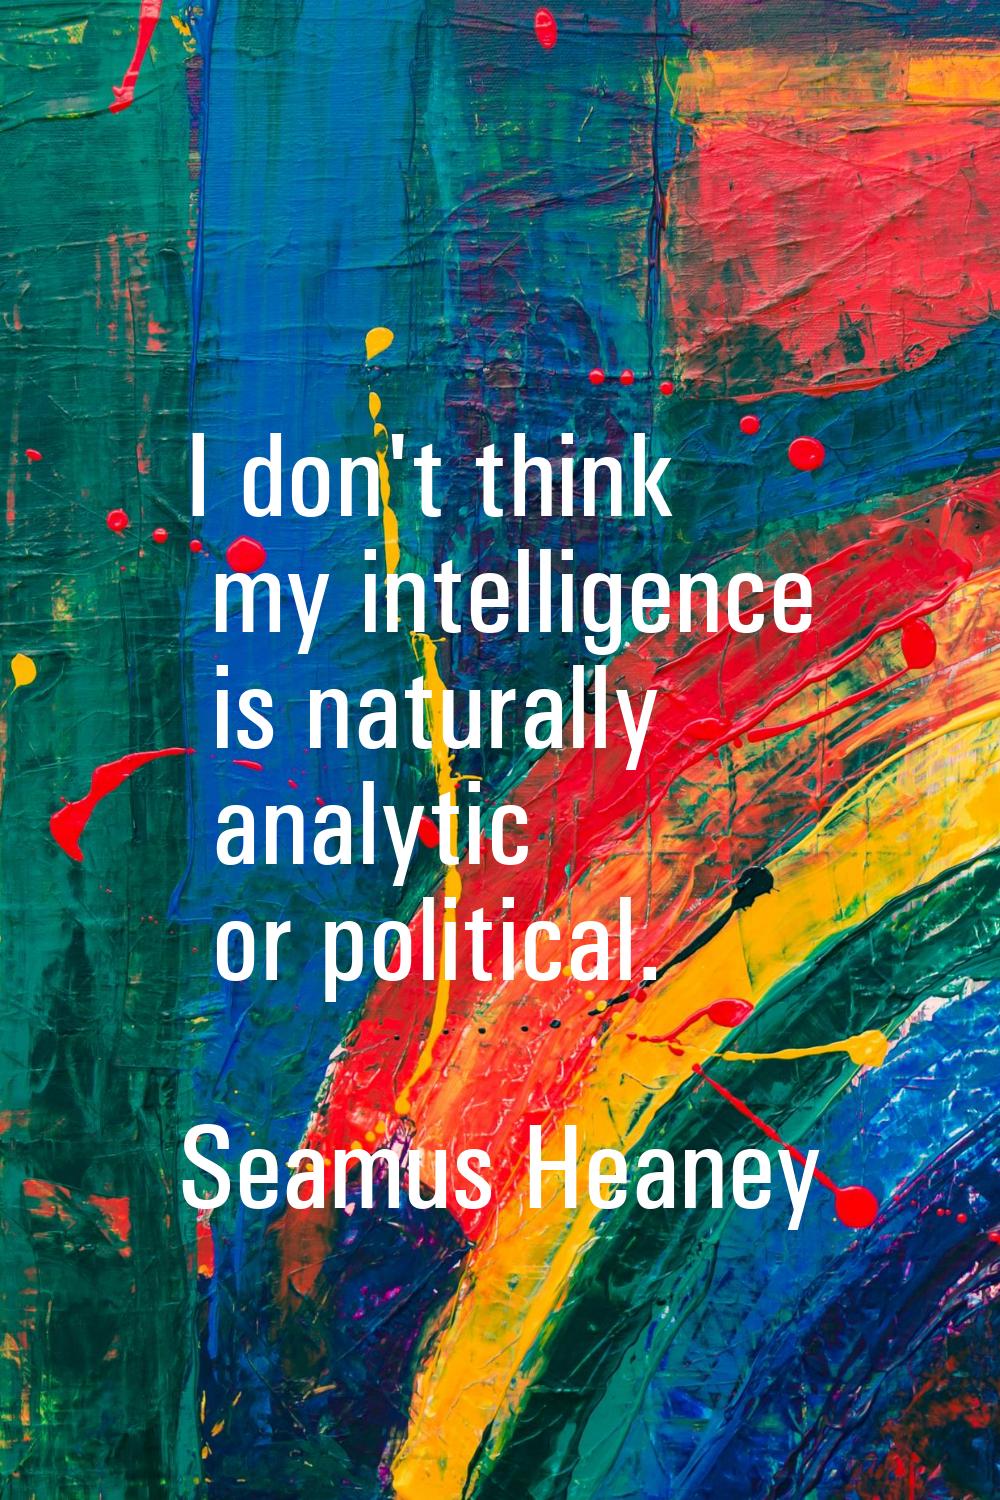 I don't think my intelligence is naturally analytic or political.